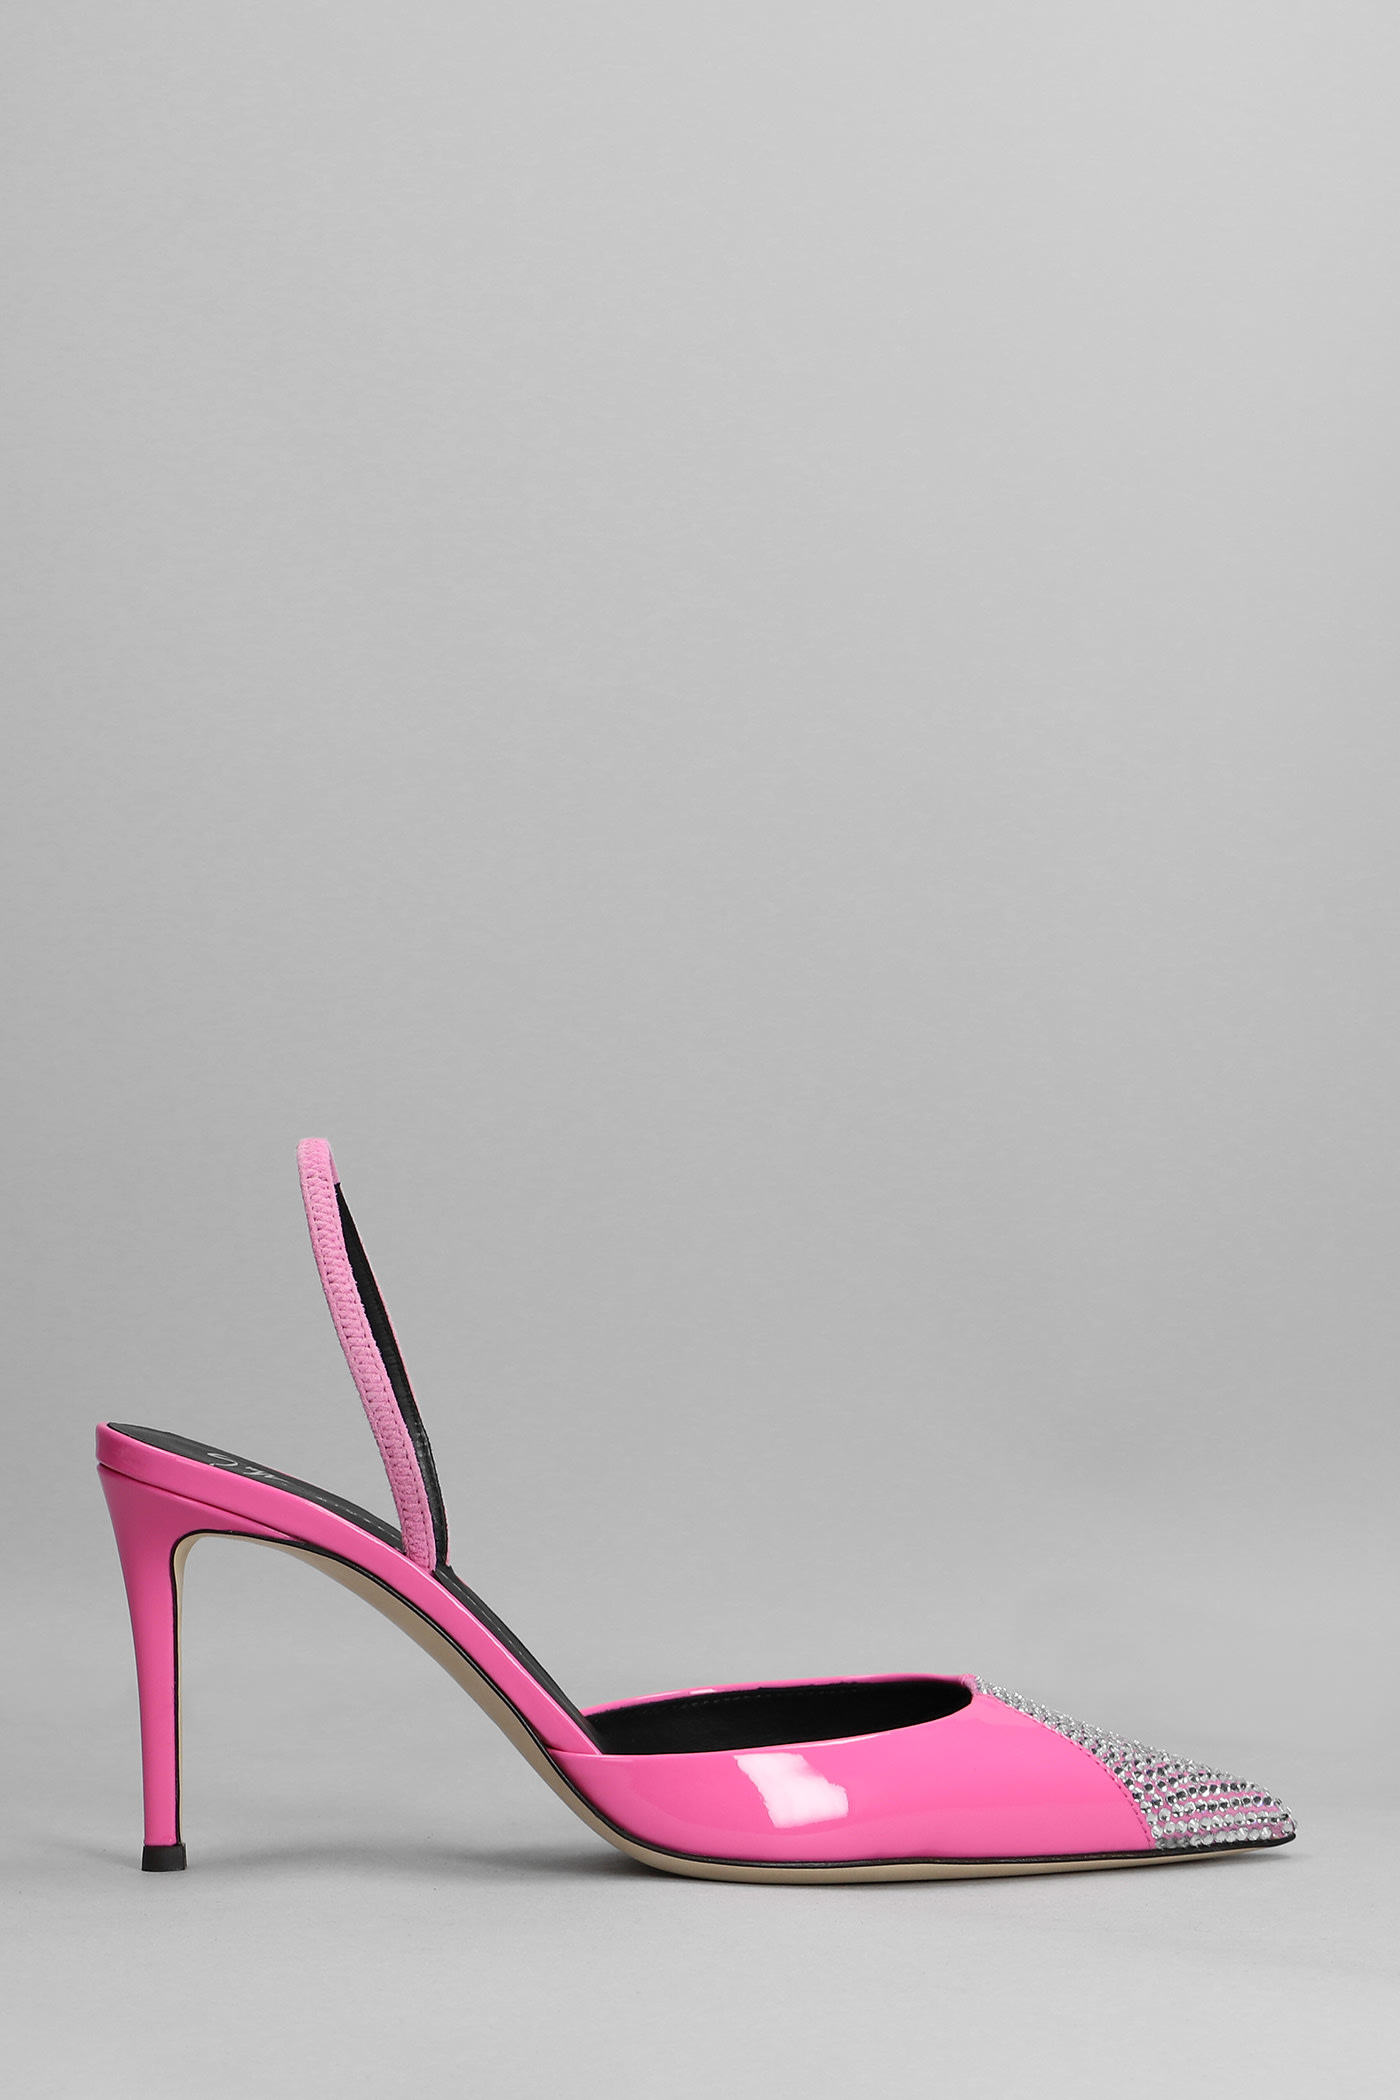 Giuseppe Zanotti Pumps In Rose-pink Patent Leather